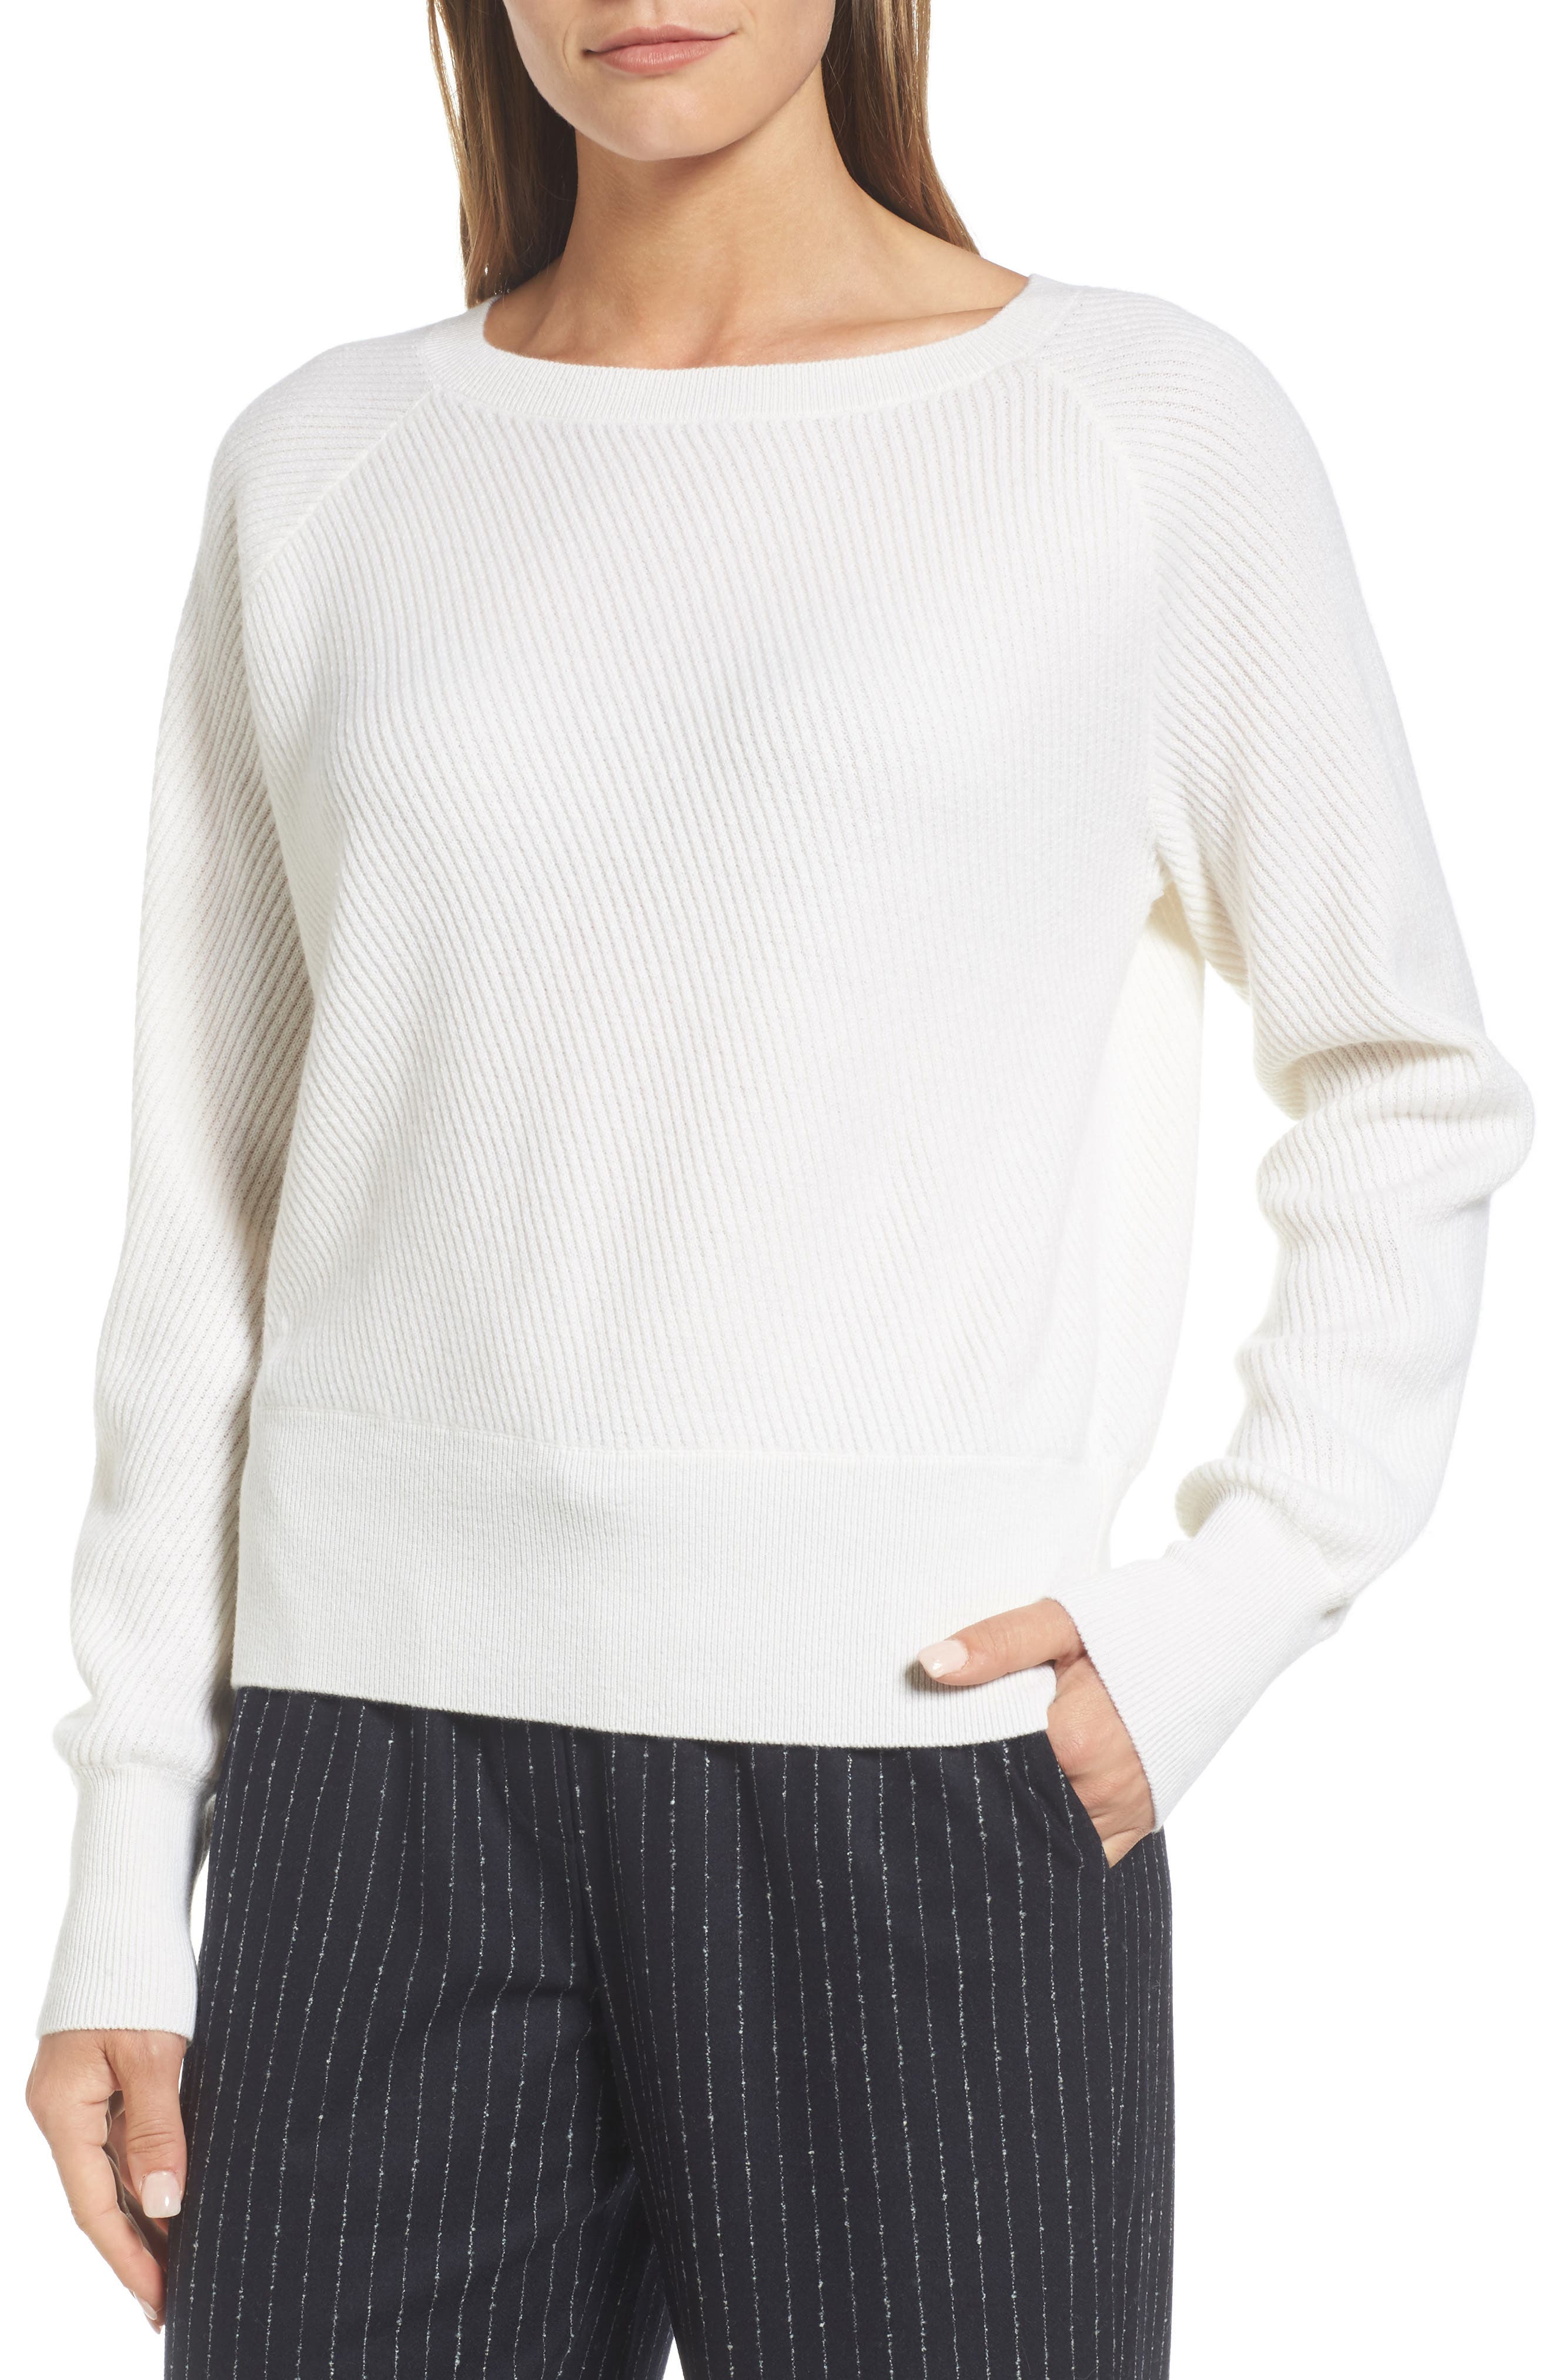 Women's Nordstrom Signature Cashmere Sweaters | Nordstrom